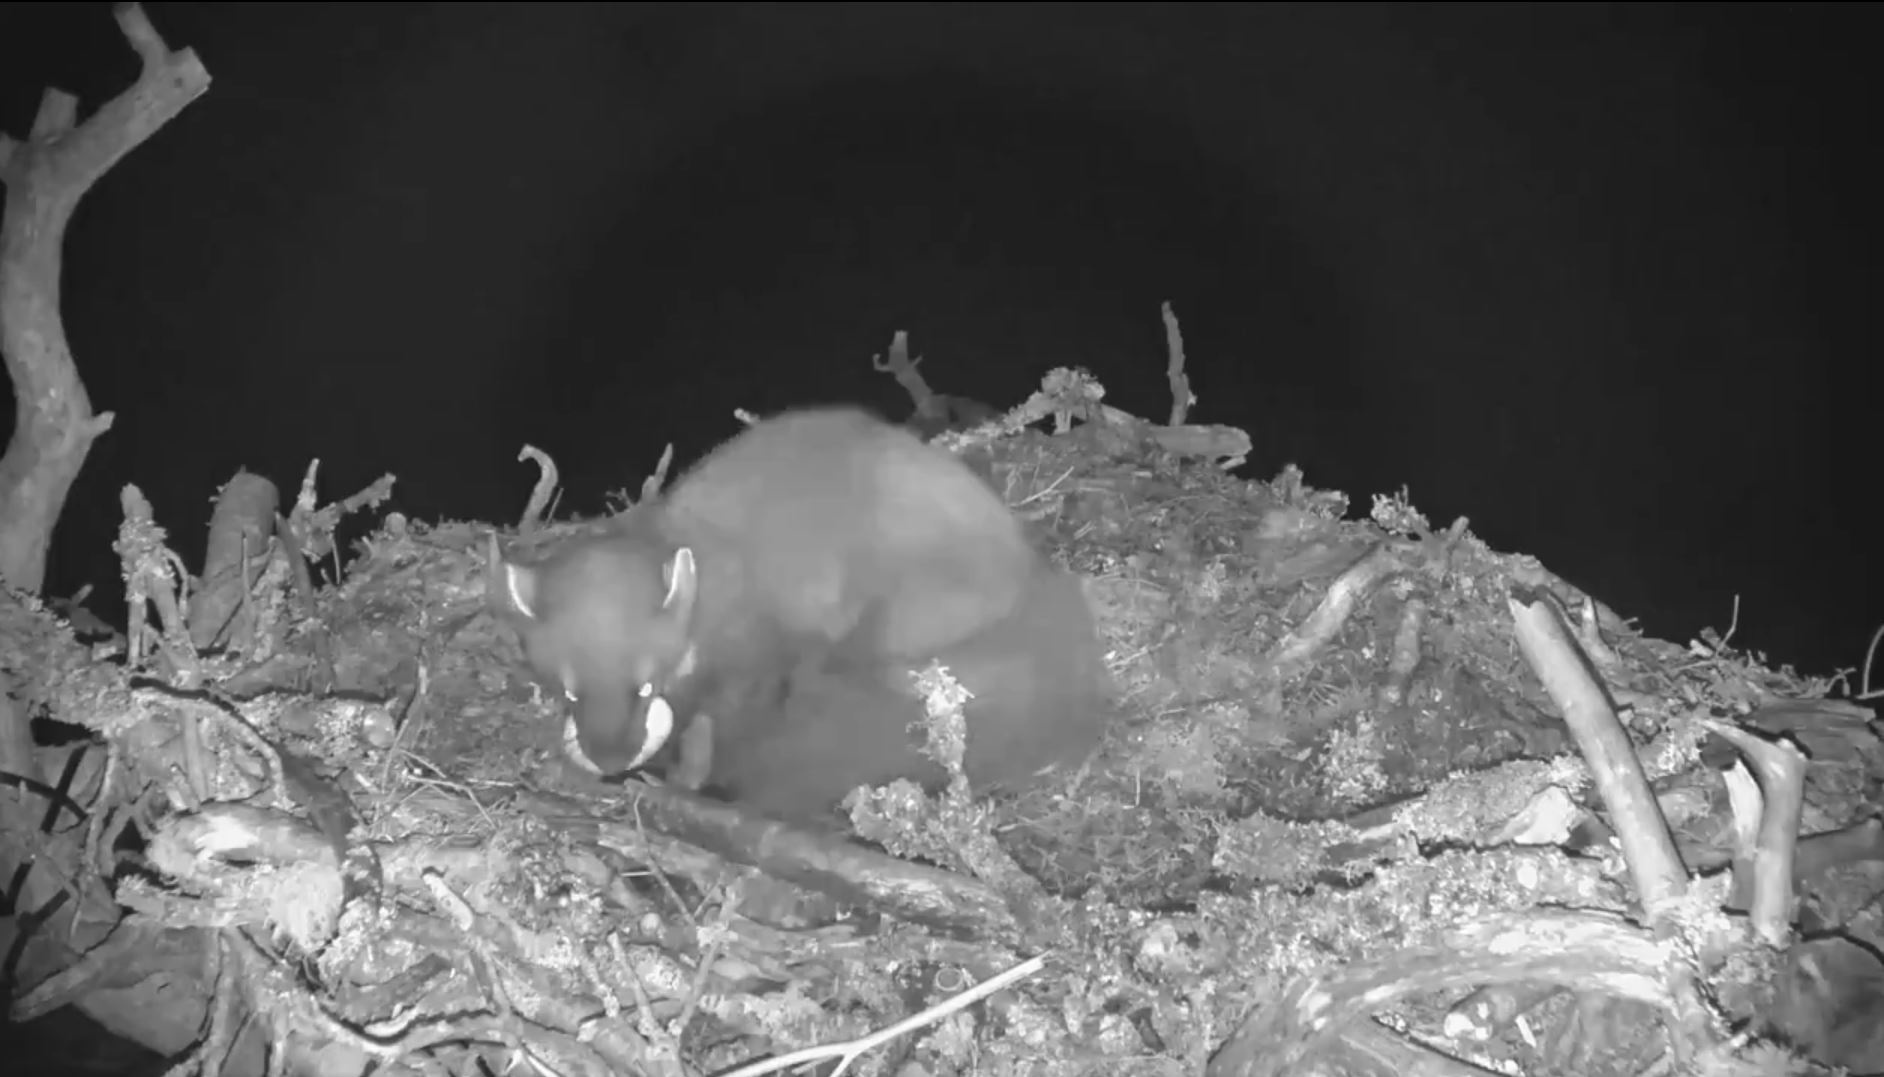 Heartbreaking scenes emerged from Lochaber last night after two ospreys lost three of their nesting eggs to a pine marten